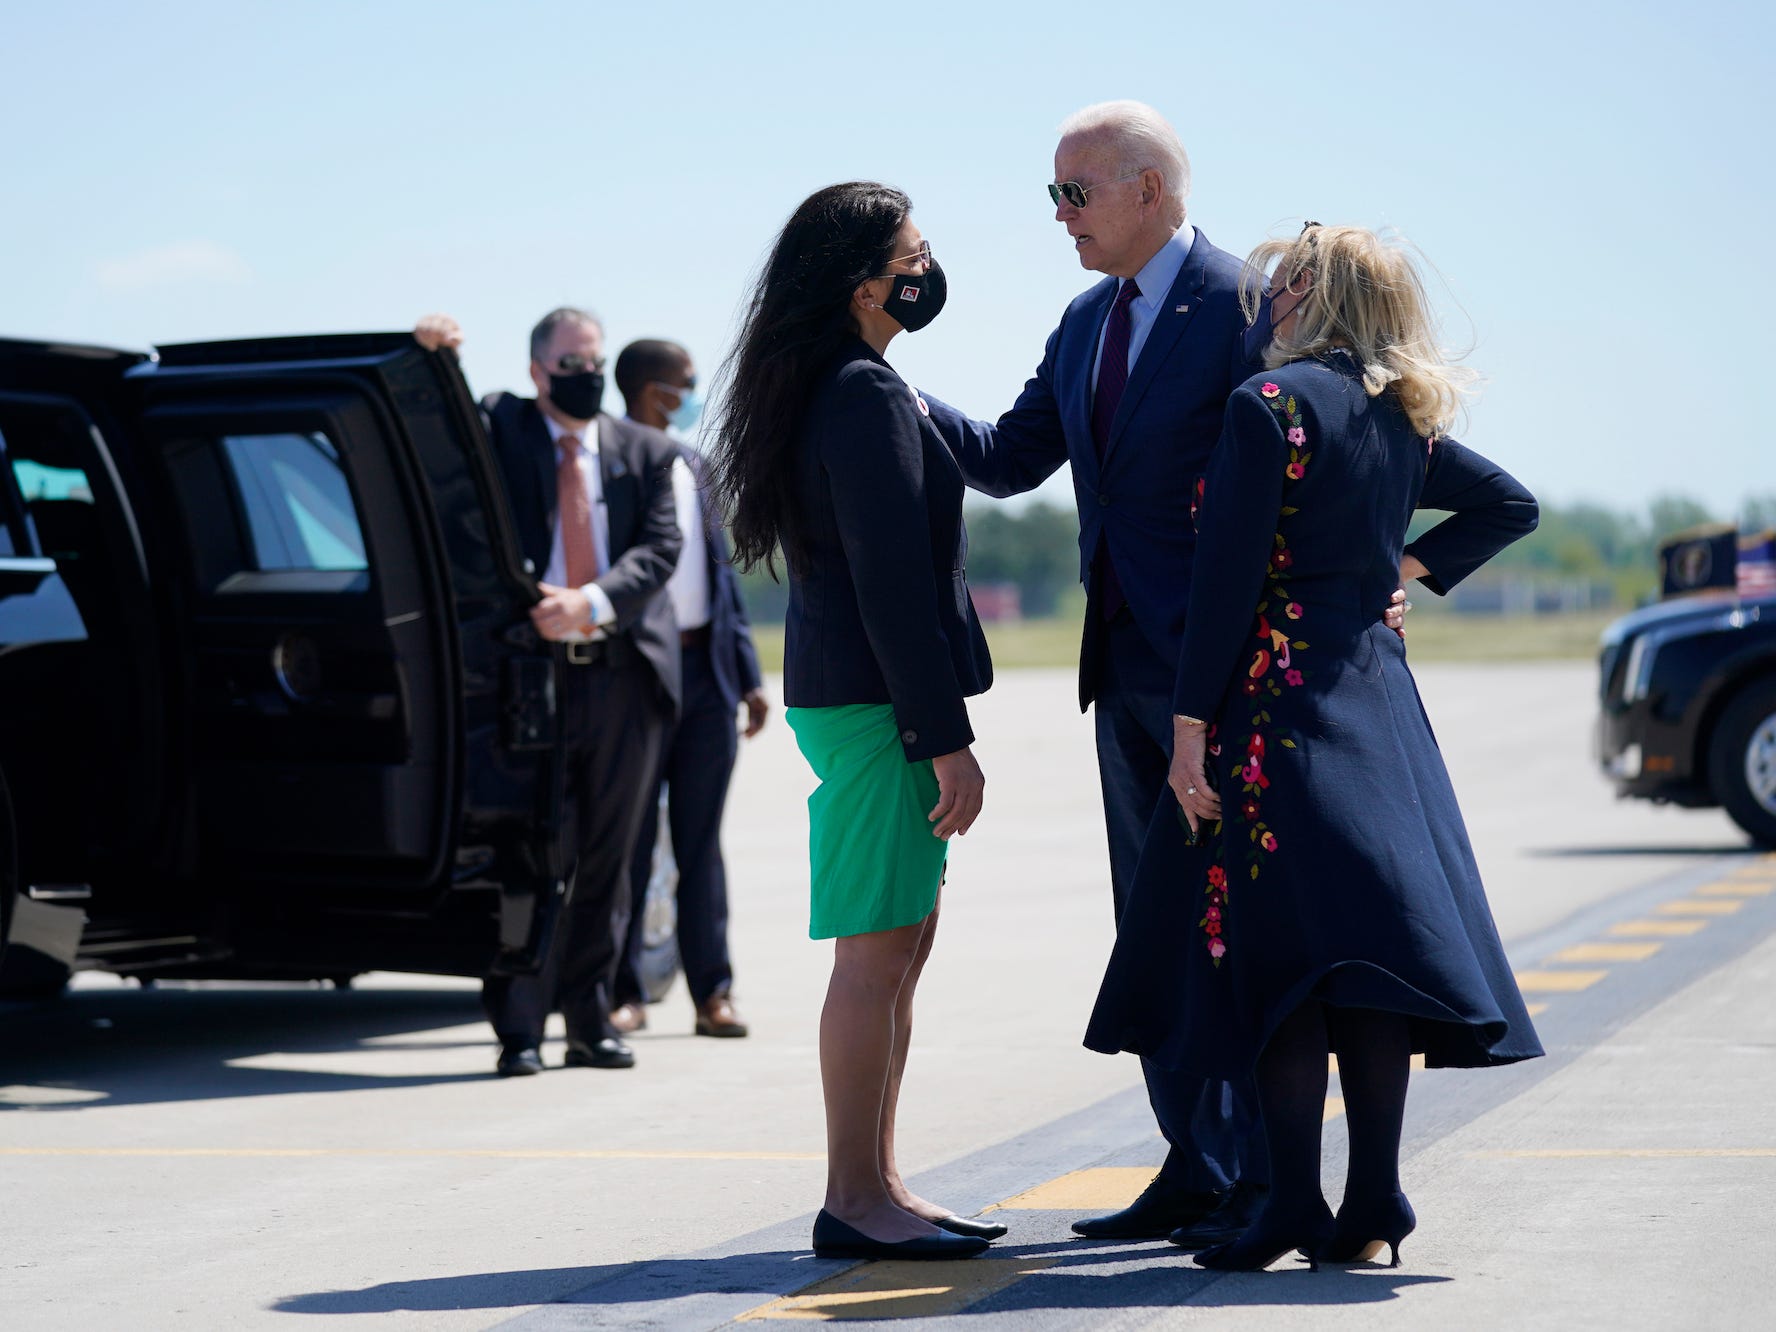 Rep. Tlaib confronts President Biden on the tarmac of the Detroit Metropolitan Wayne County Airport on May 18, 2021.